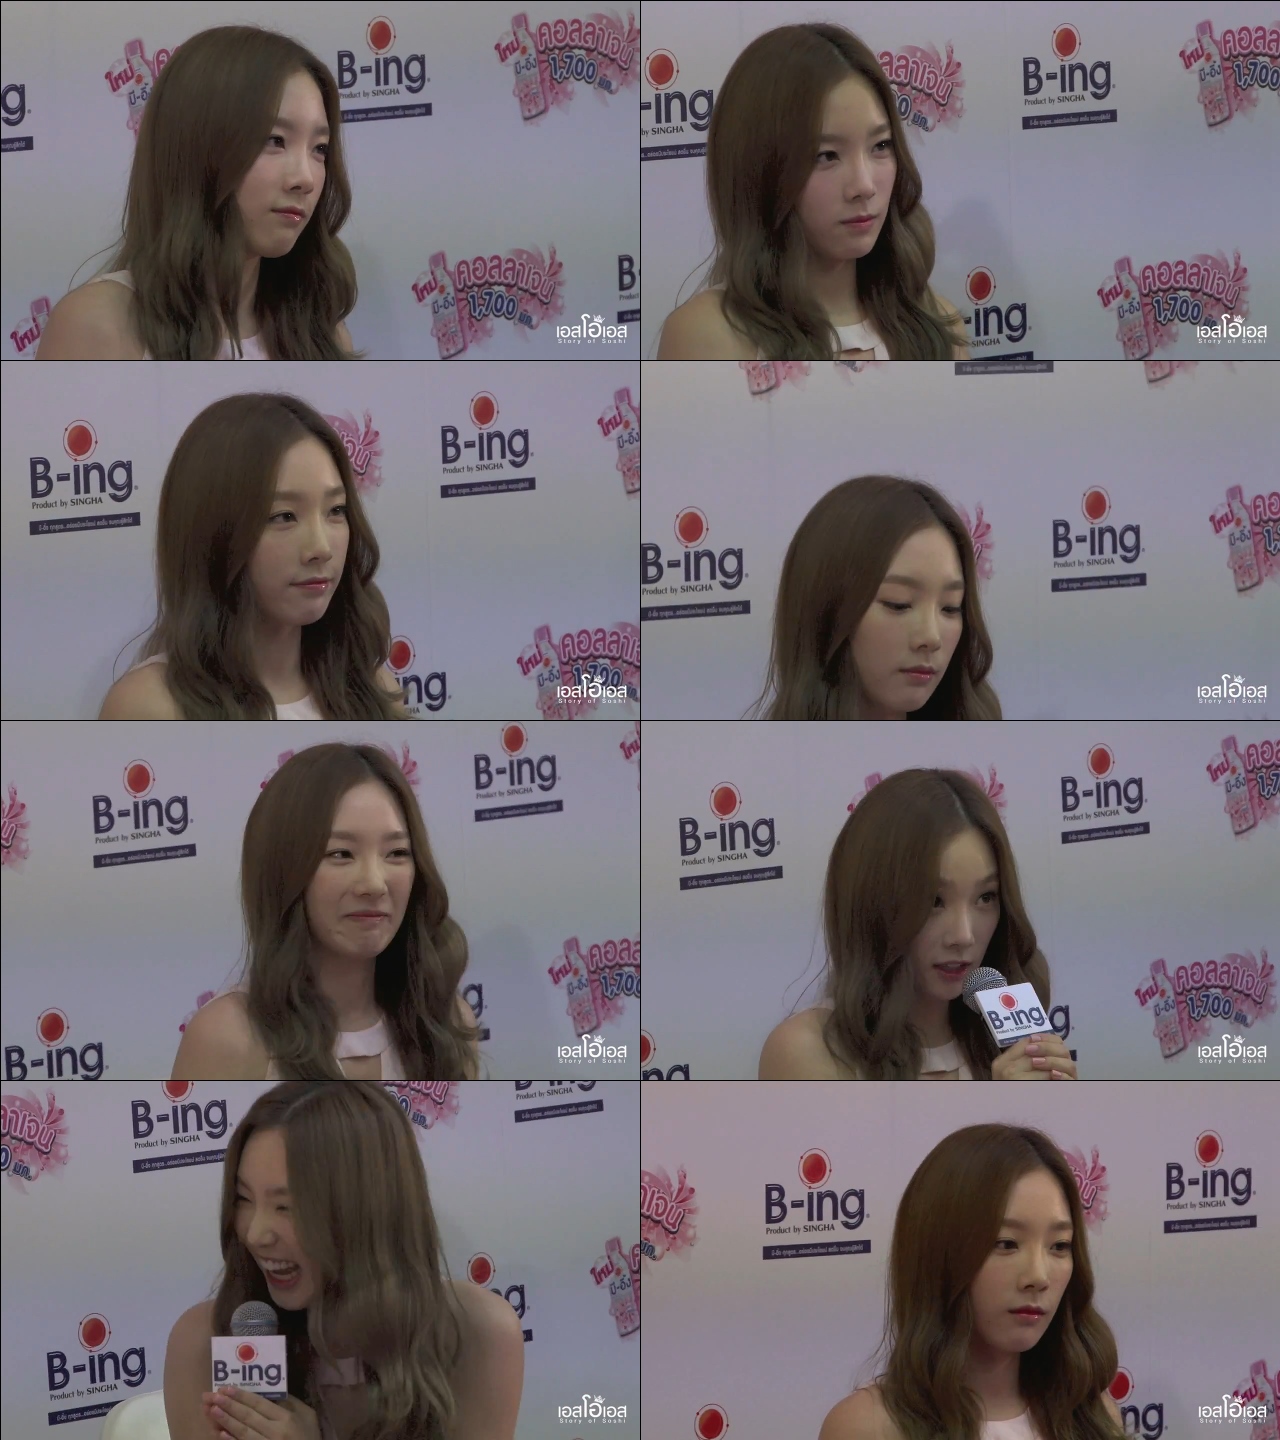 130821 B-ING PRESS CONFERENCE 태연 직캠 by SOS